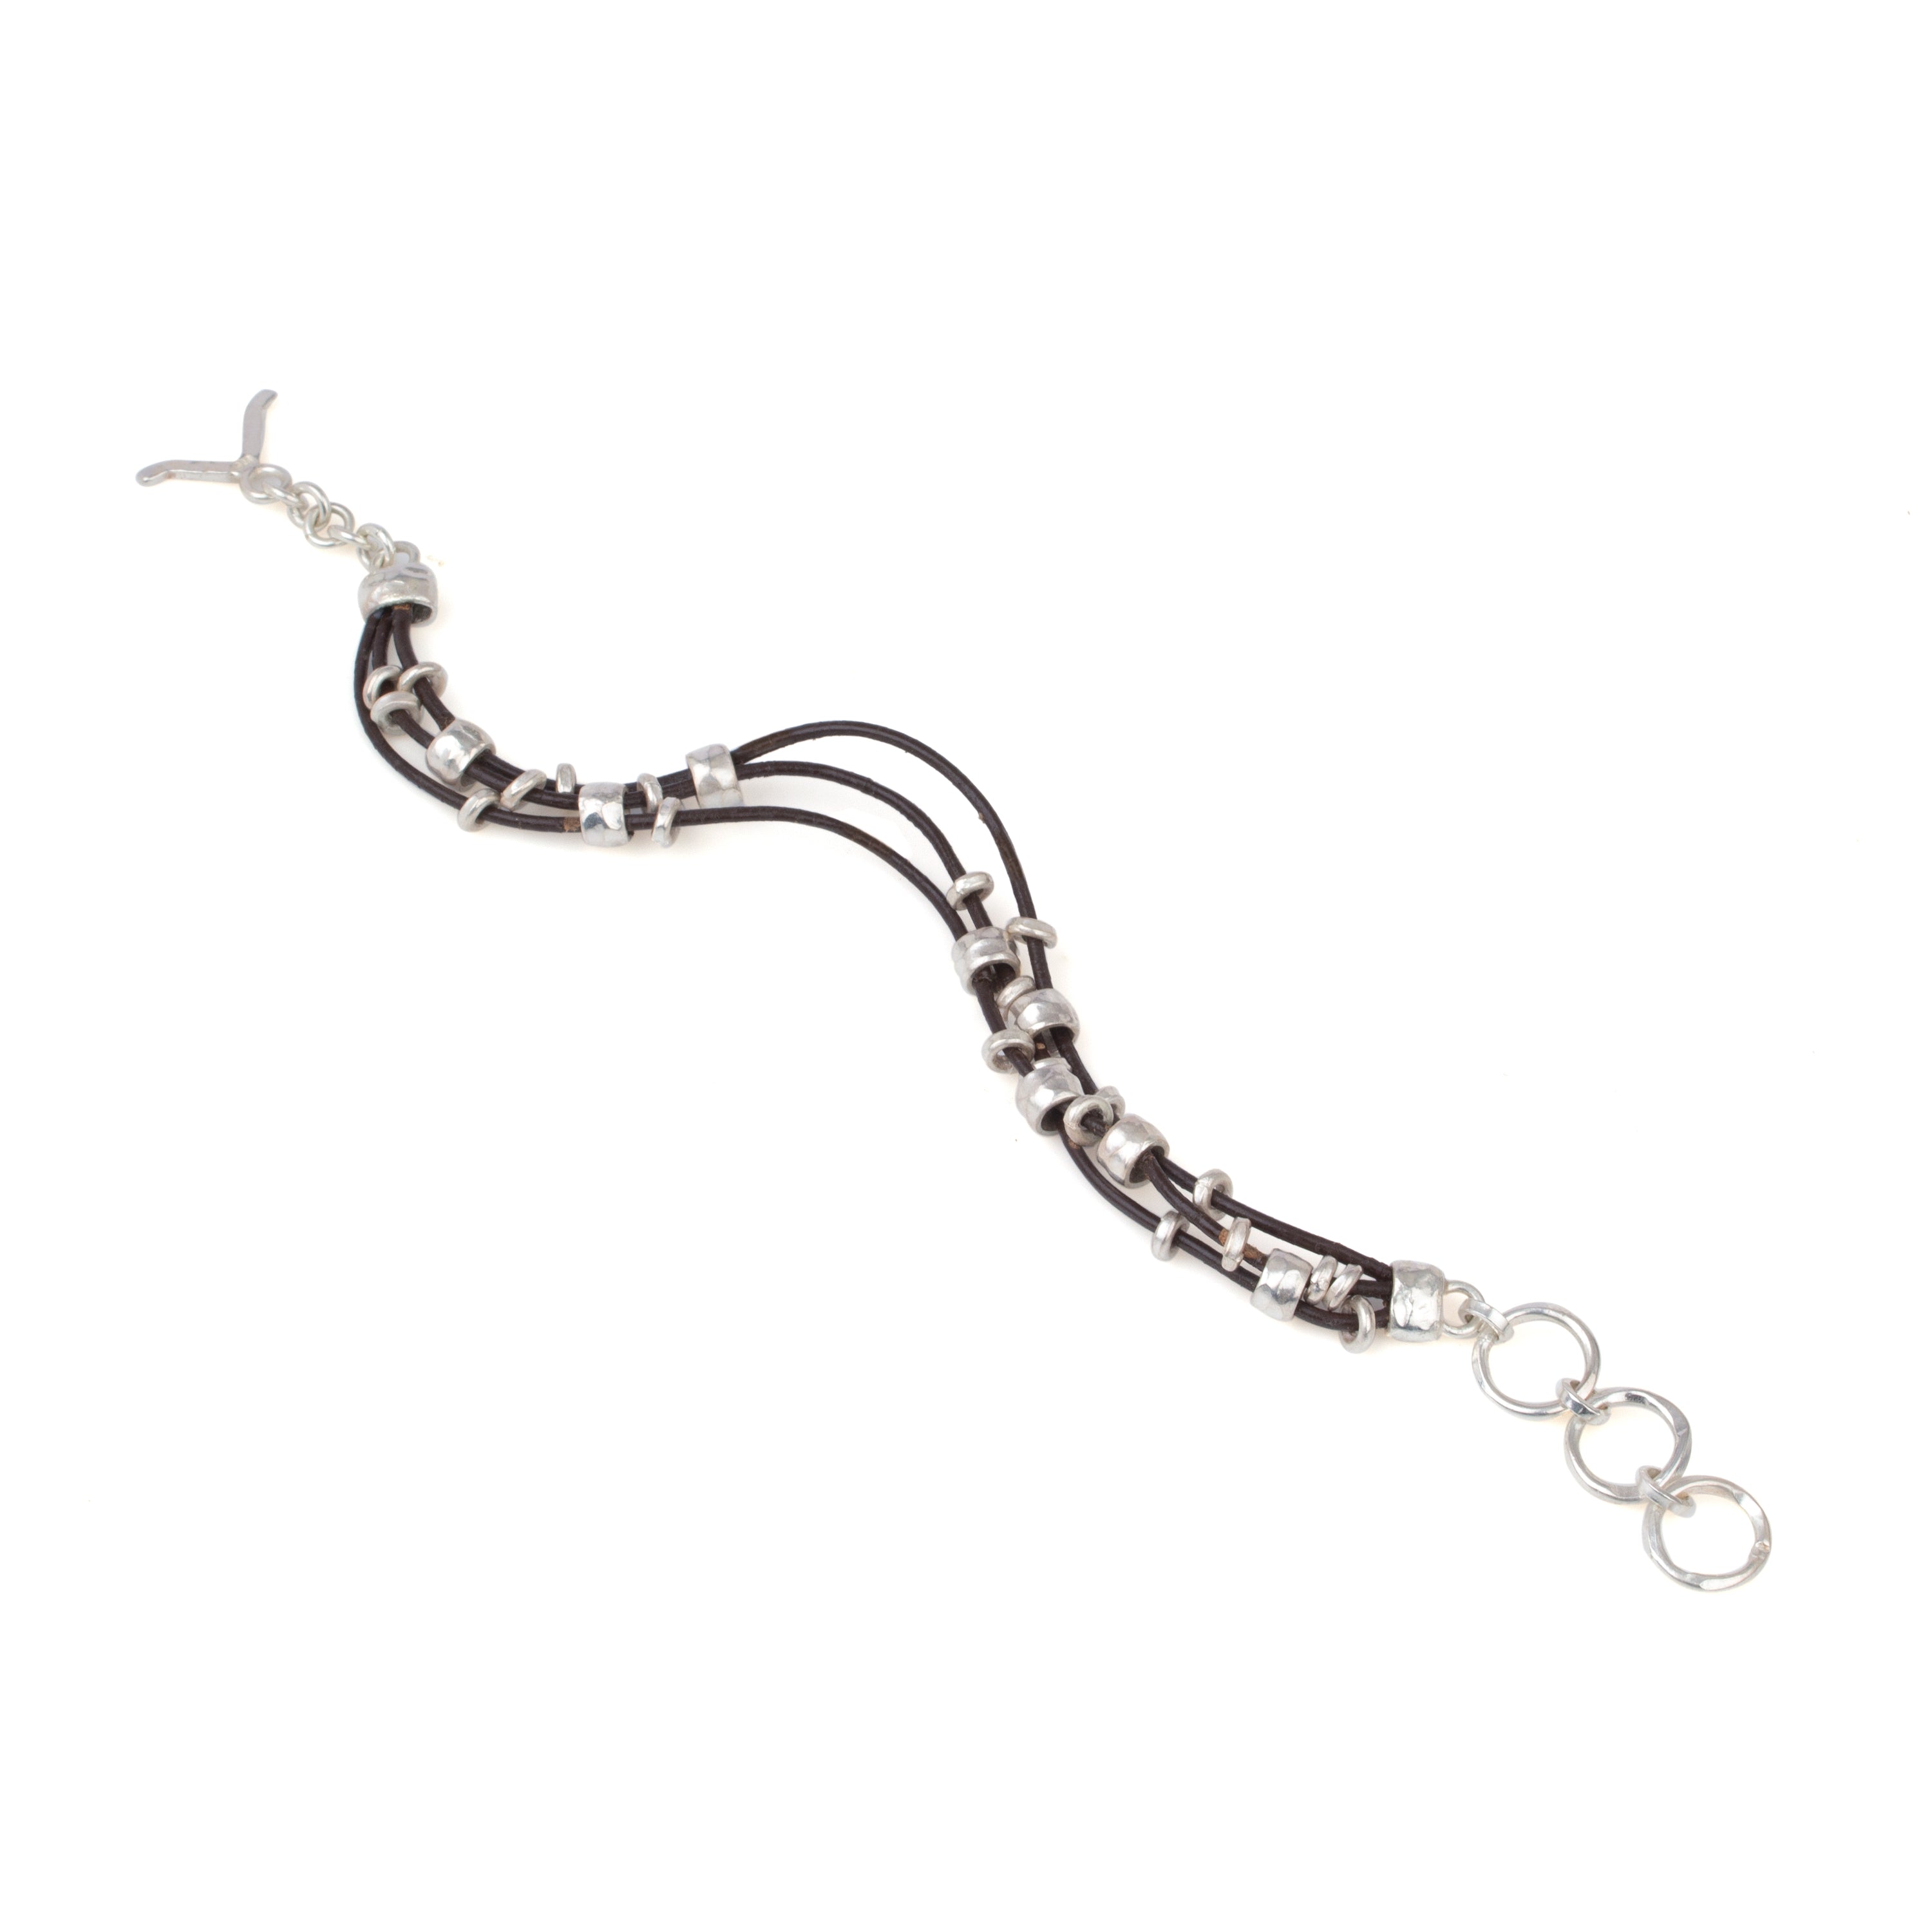 Rhodium Silver Beads Leaves Collection Bracelet